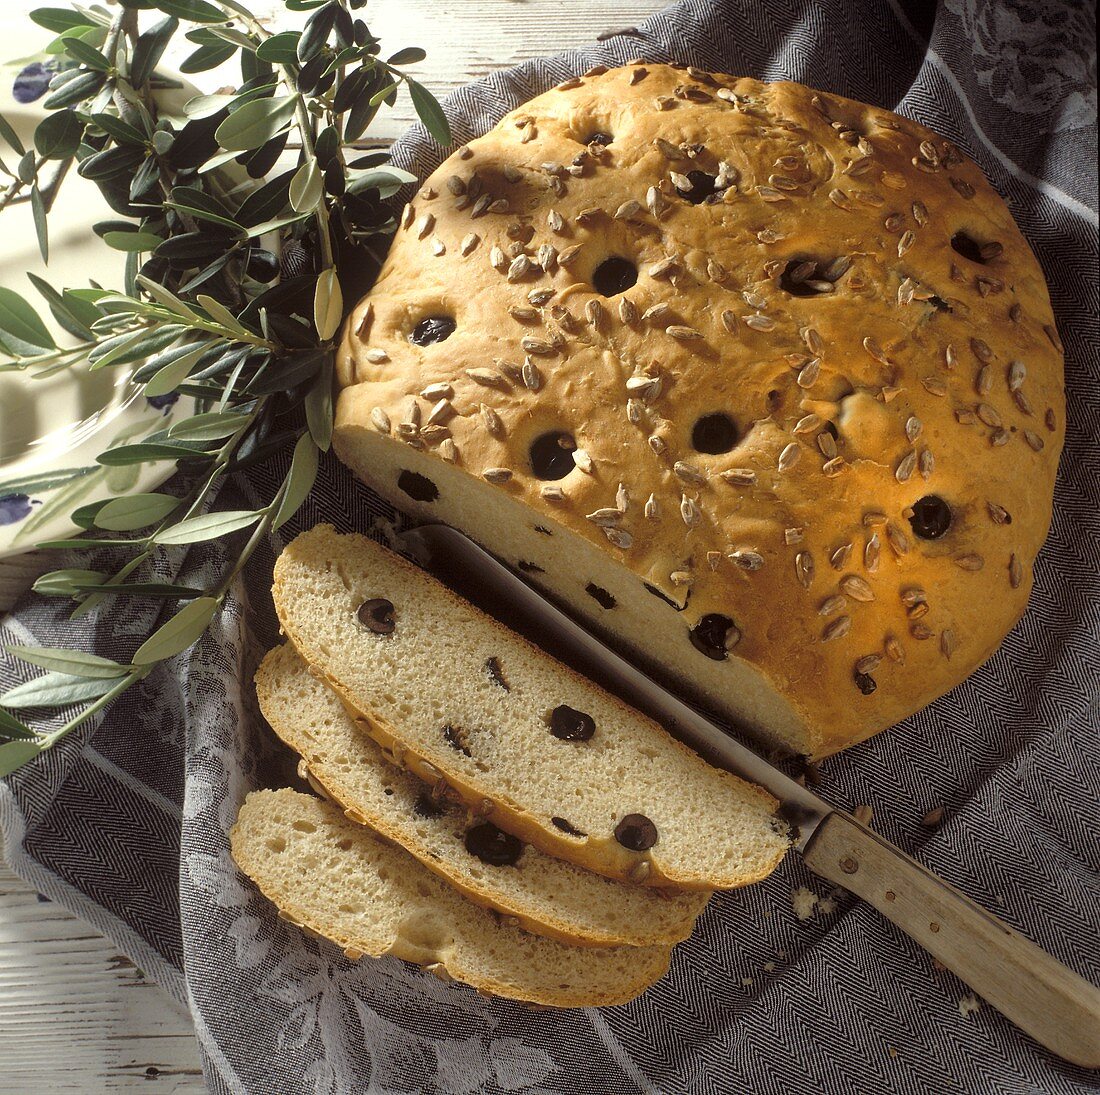 Olive bread with sunflower seeds